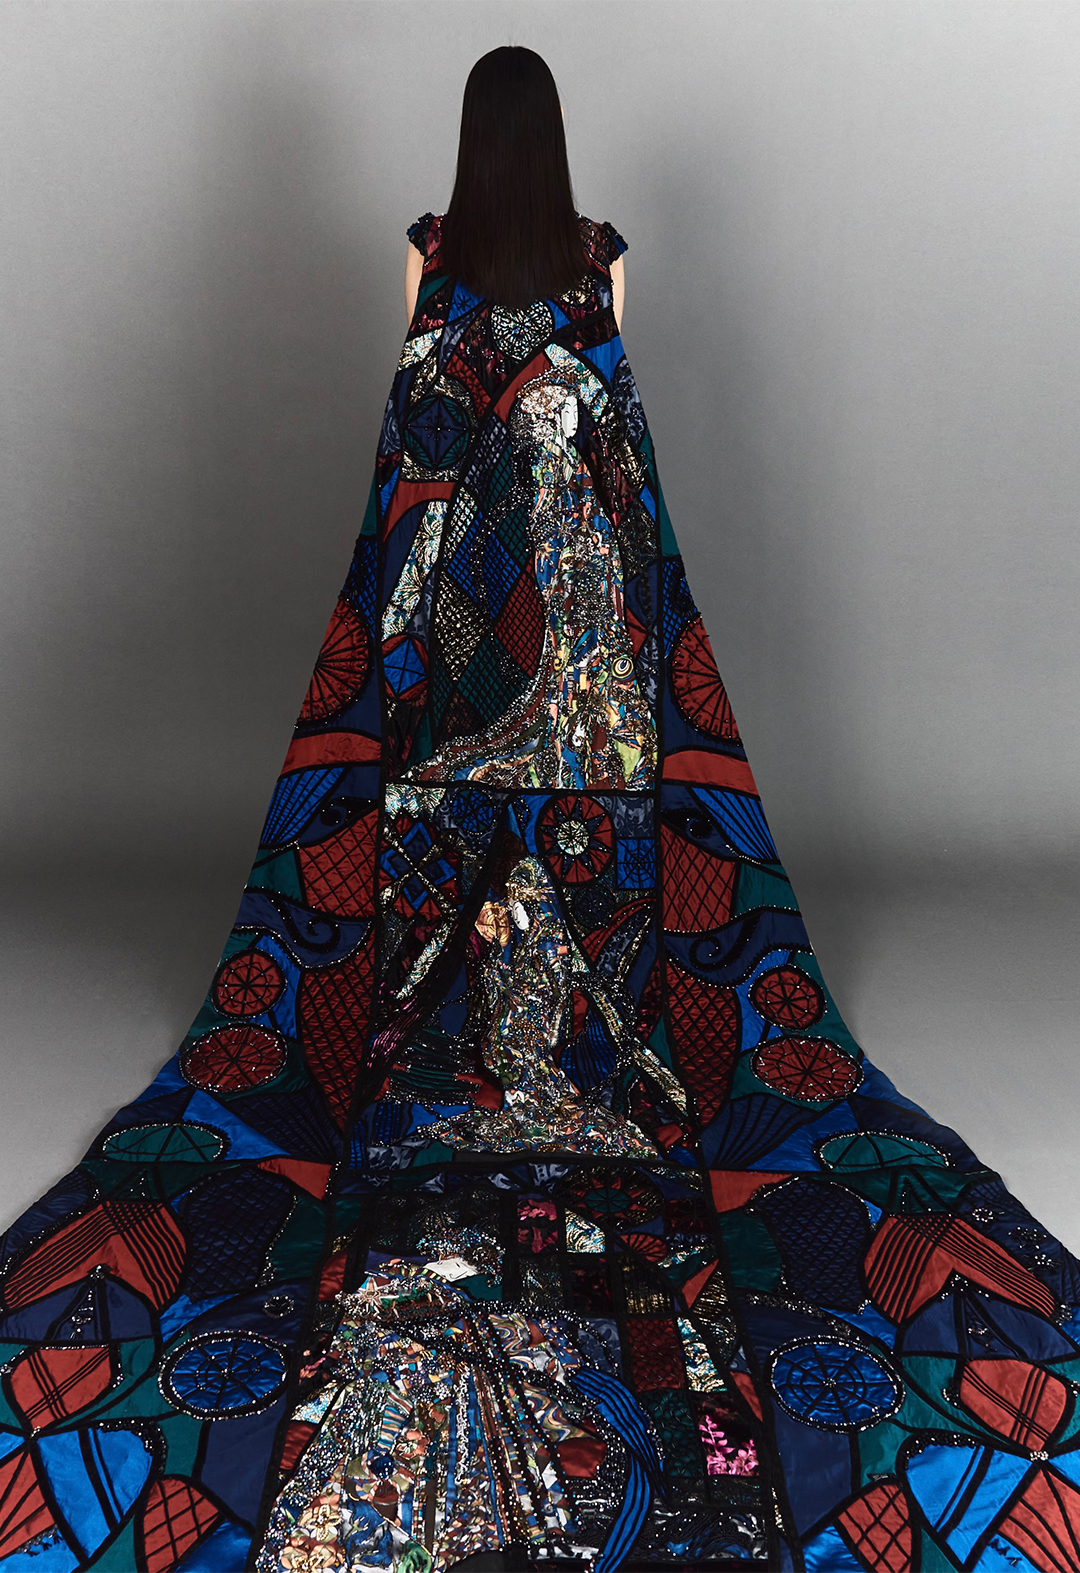 A back view of a model wearing a stained glass cape.